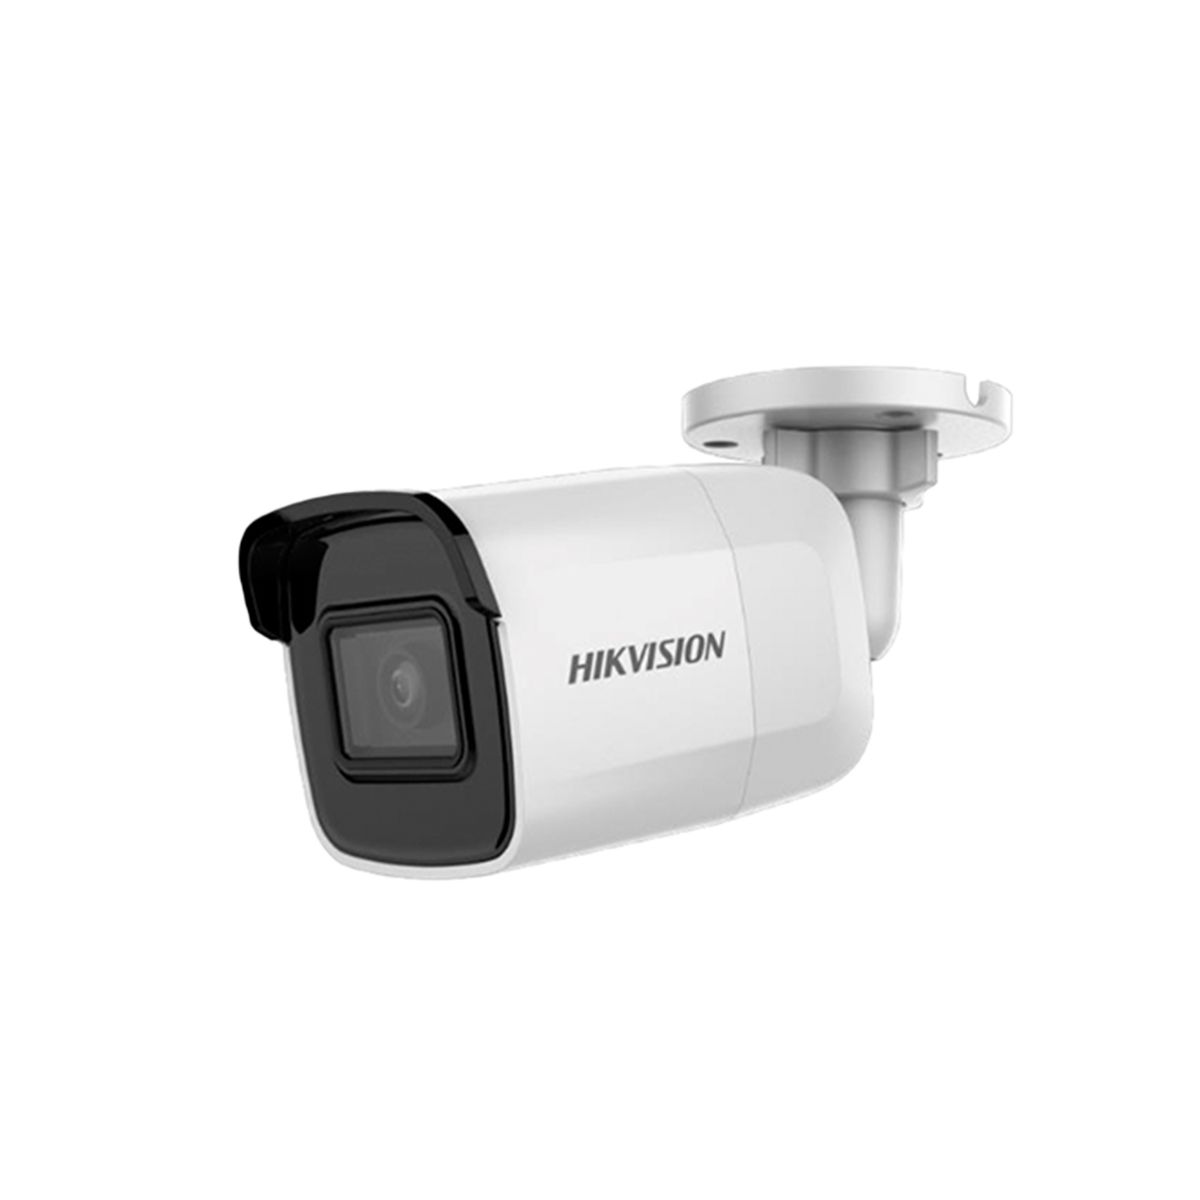 Cámara IP WiFi Hikvision Tipo Bullet DS-2CD2021G1-IW DS-2CD2021G1-IW